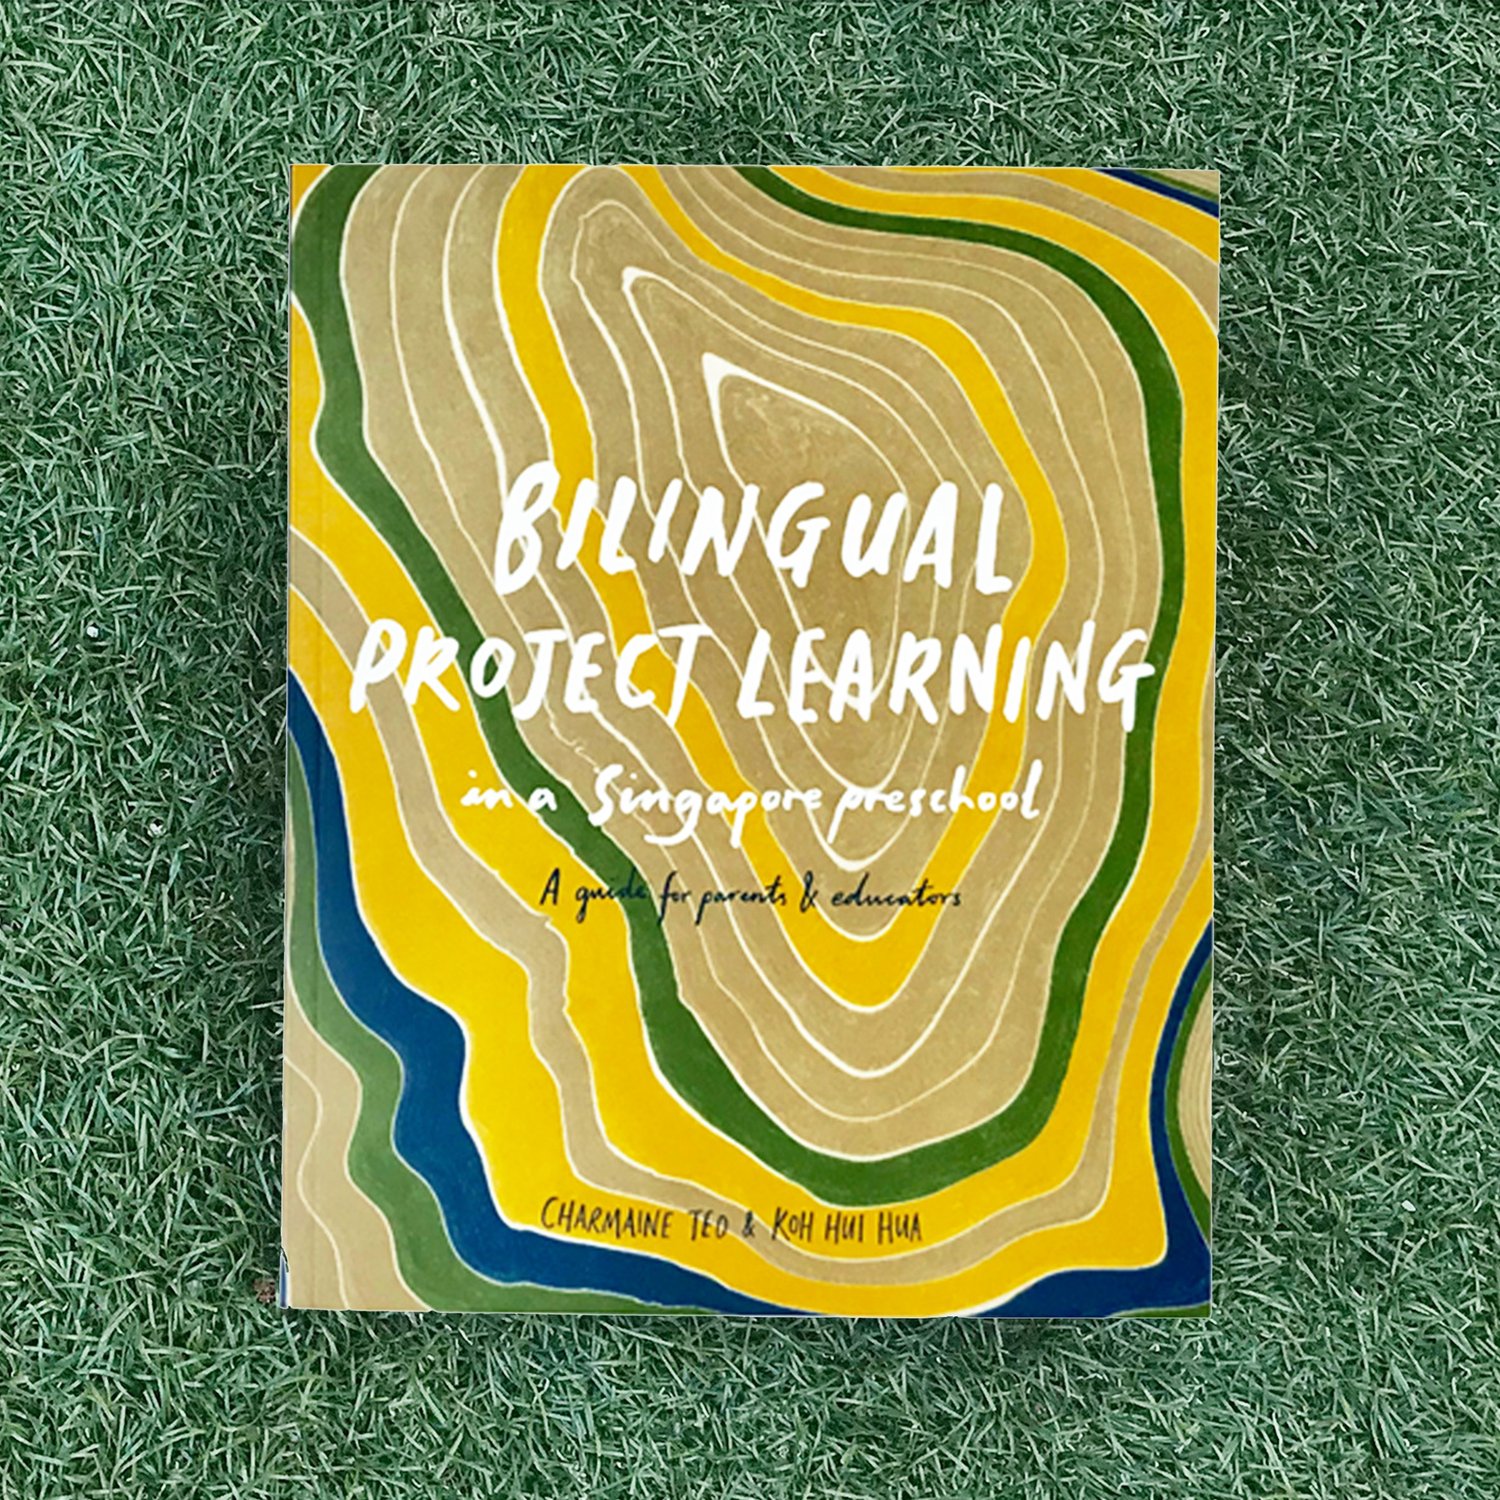 Image of Bilingual Project Learning in a Singapore Preschool